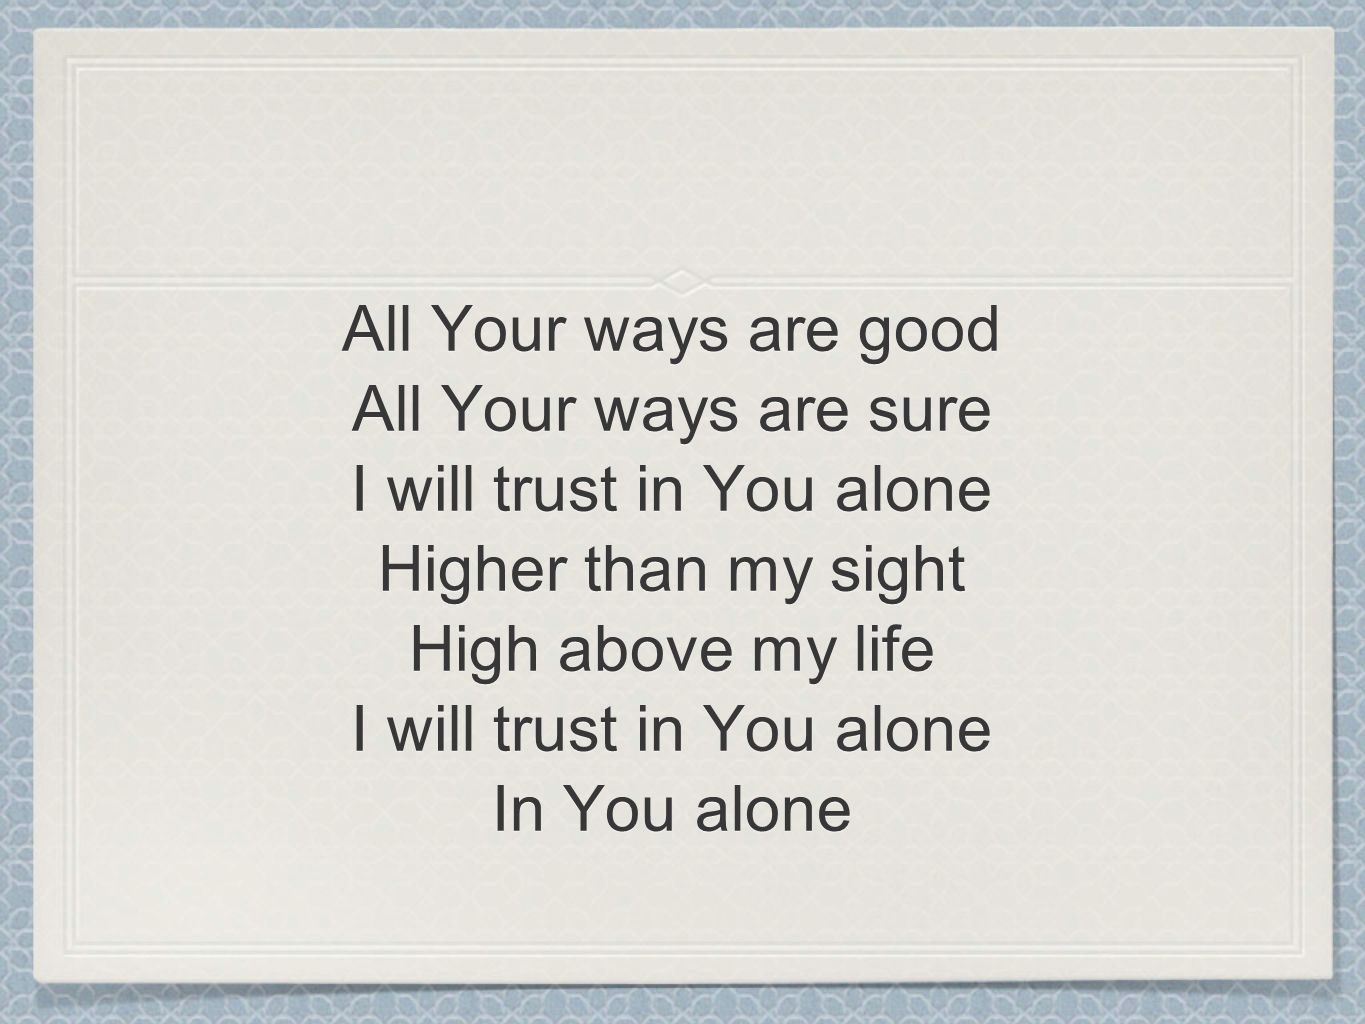 All Your ways are good All Your ways are sure I will trust in You alone Higher than my sight High above my life I will trust in You alone In You alone